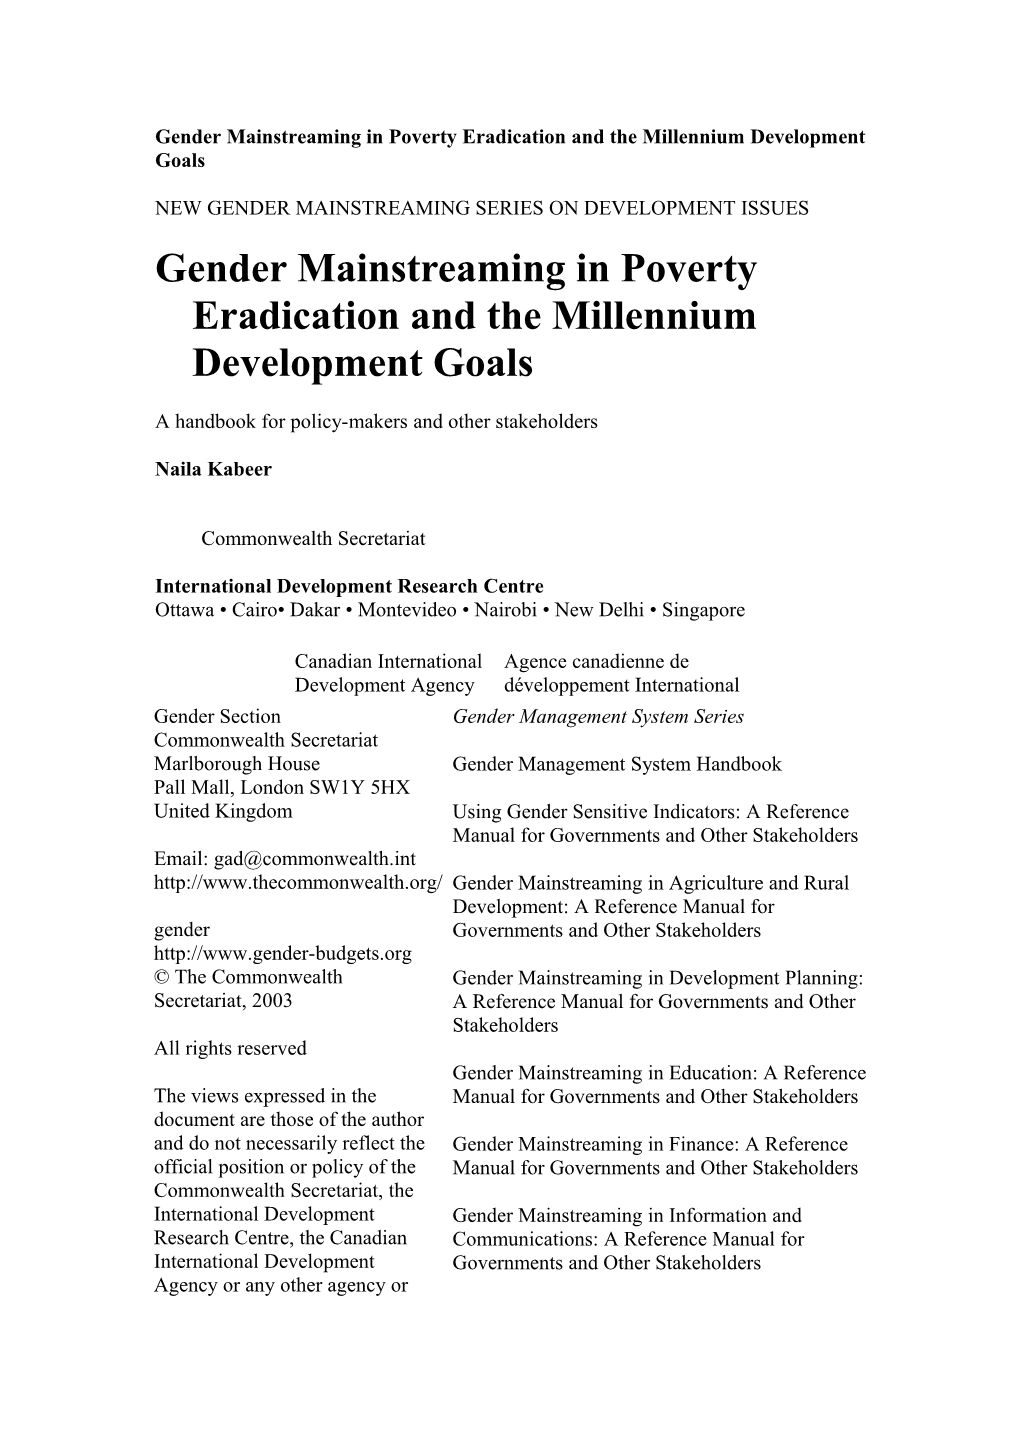 Gender Mainstreaming In Poverty Eradication And The Millennium Development Goals